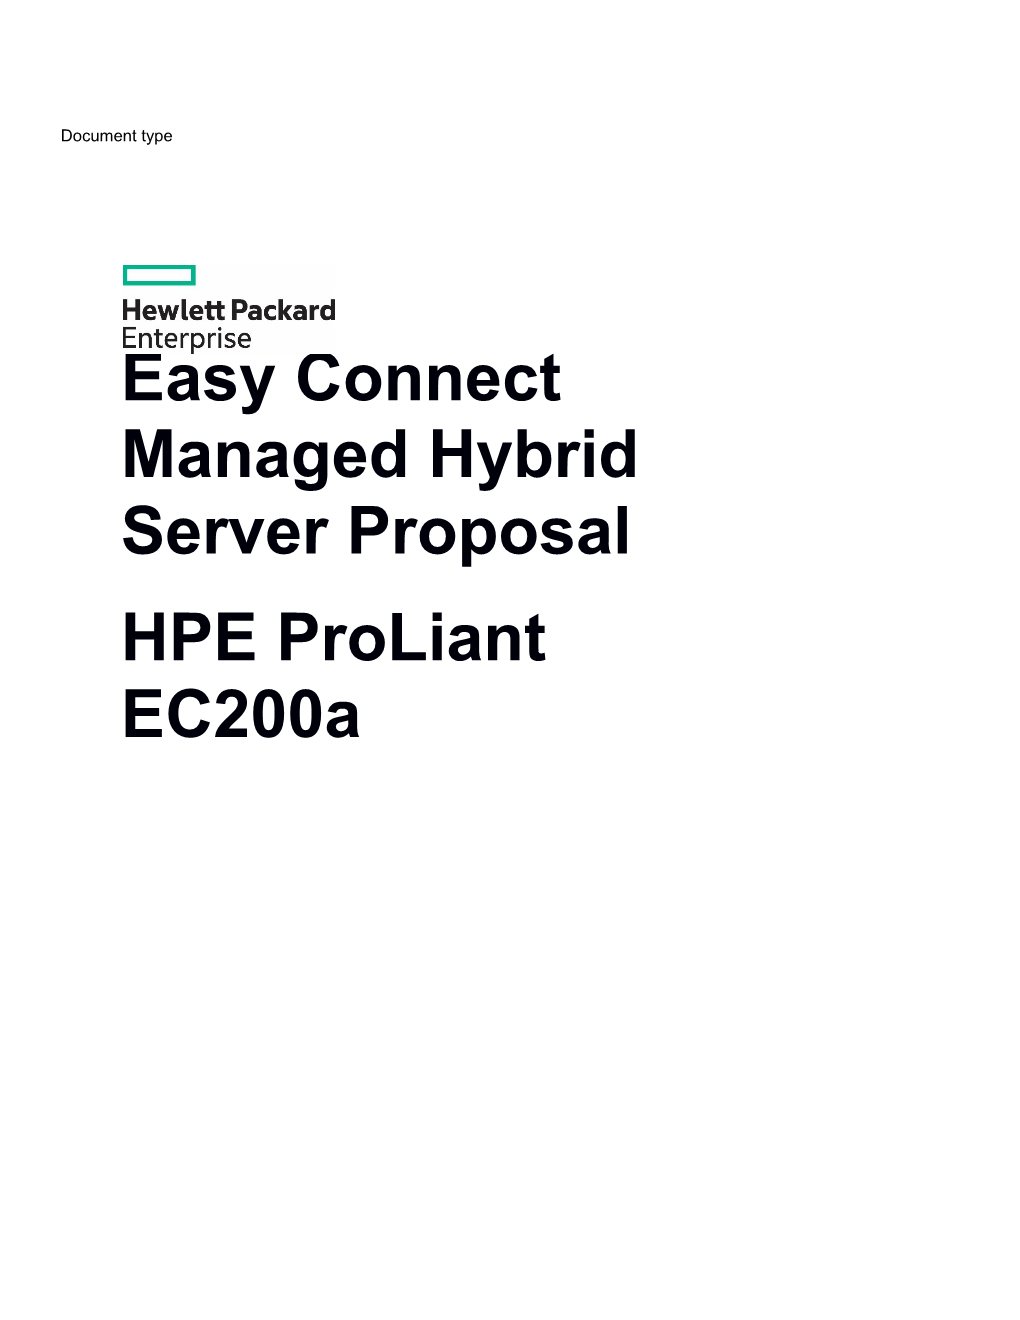 Easy Connect Managed Hybrid Server Proposal